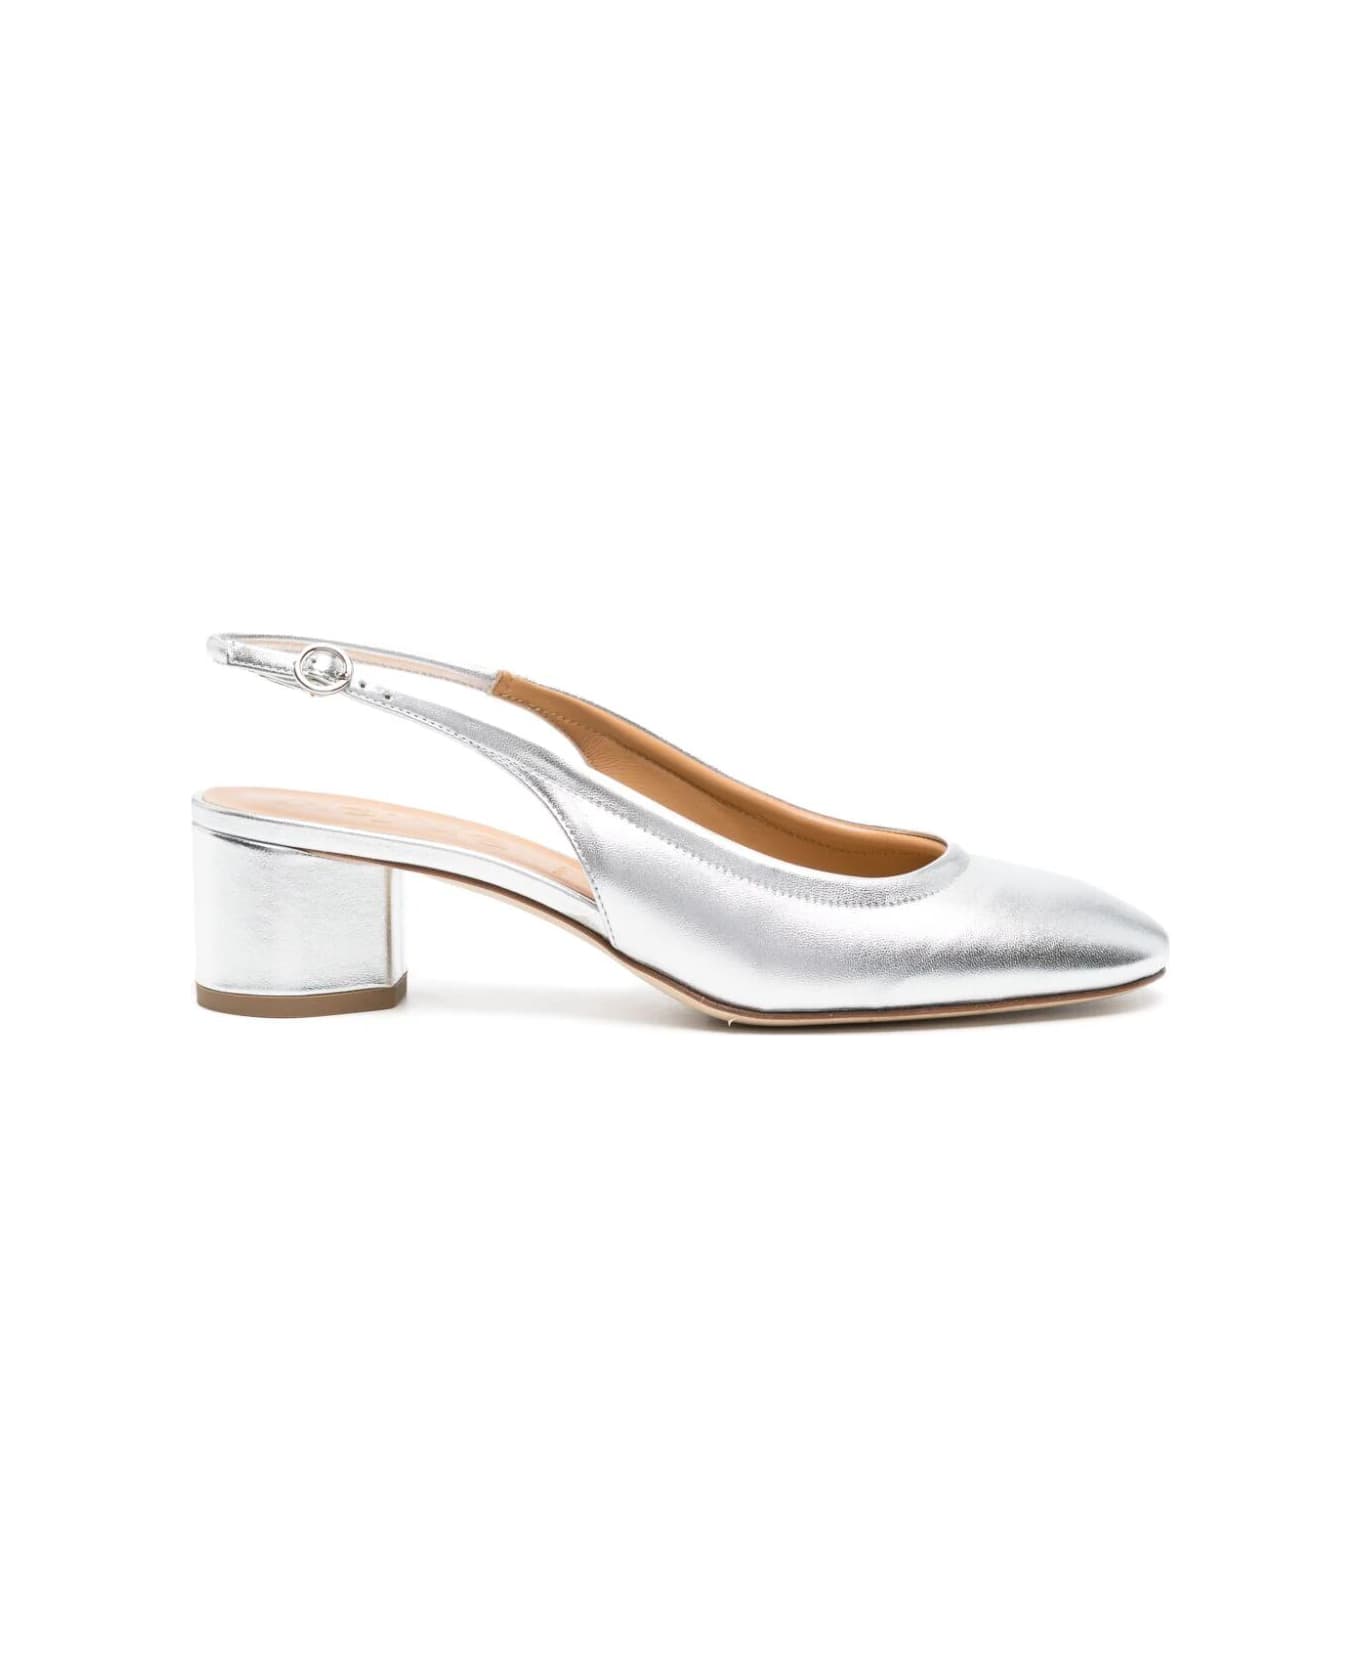 aeyde Romy Laminated Nappa Leather Silver Slingback - Silver ハイヒール